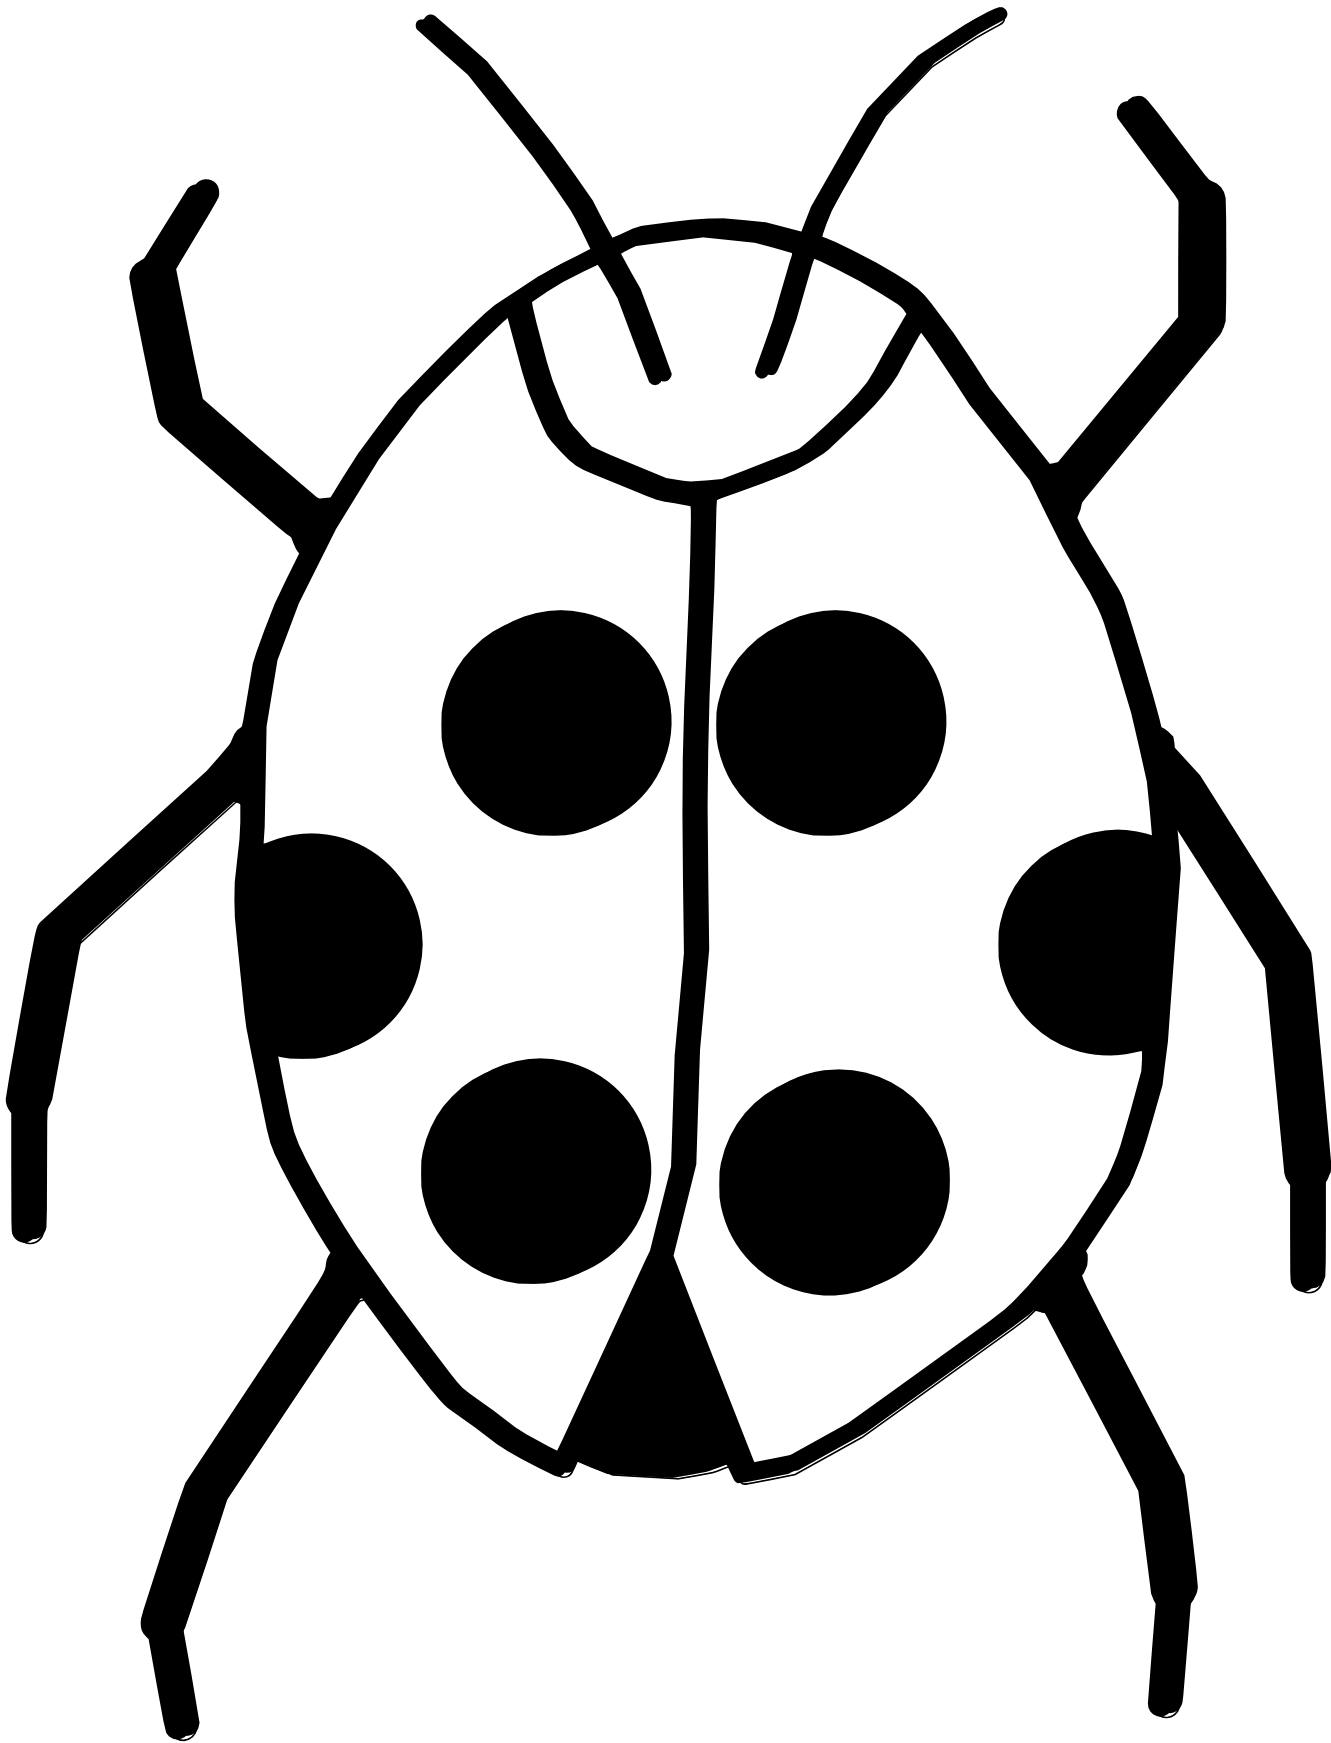 Beetle Clipart Black And White   Clipart Panda   Free Clipart Images